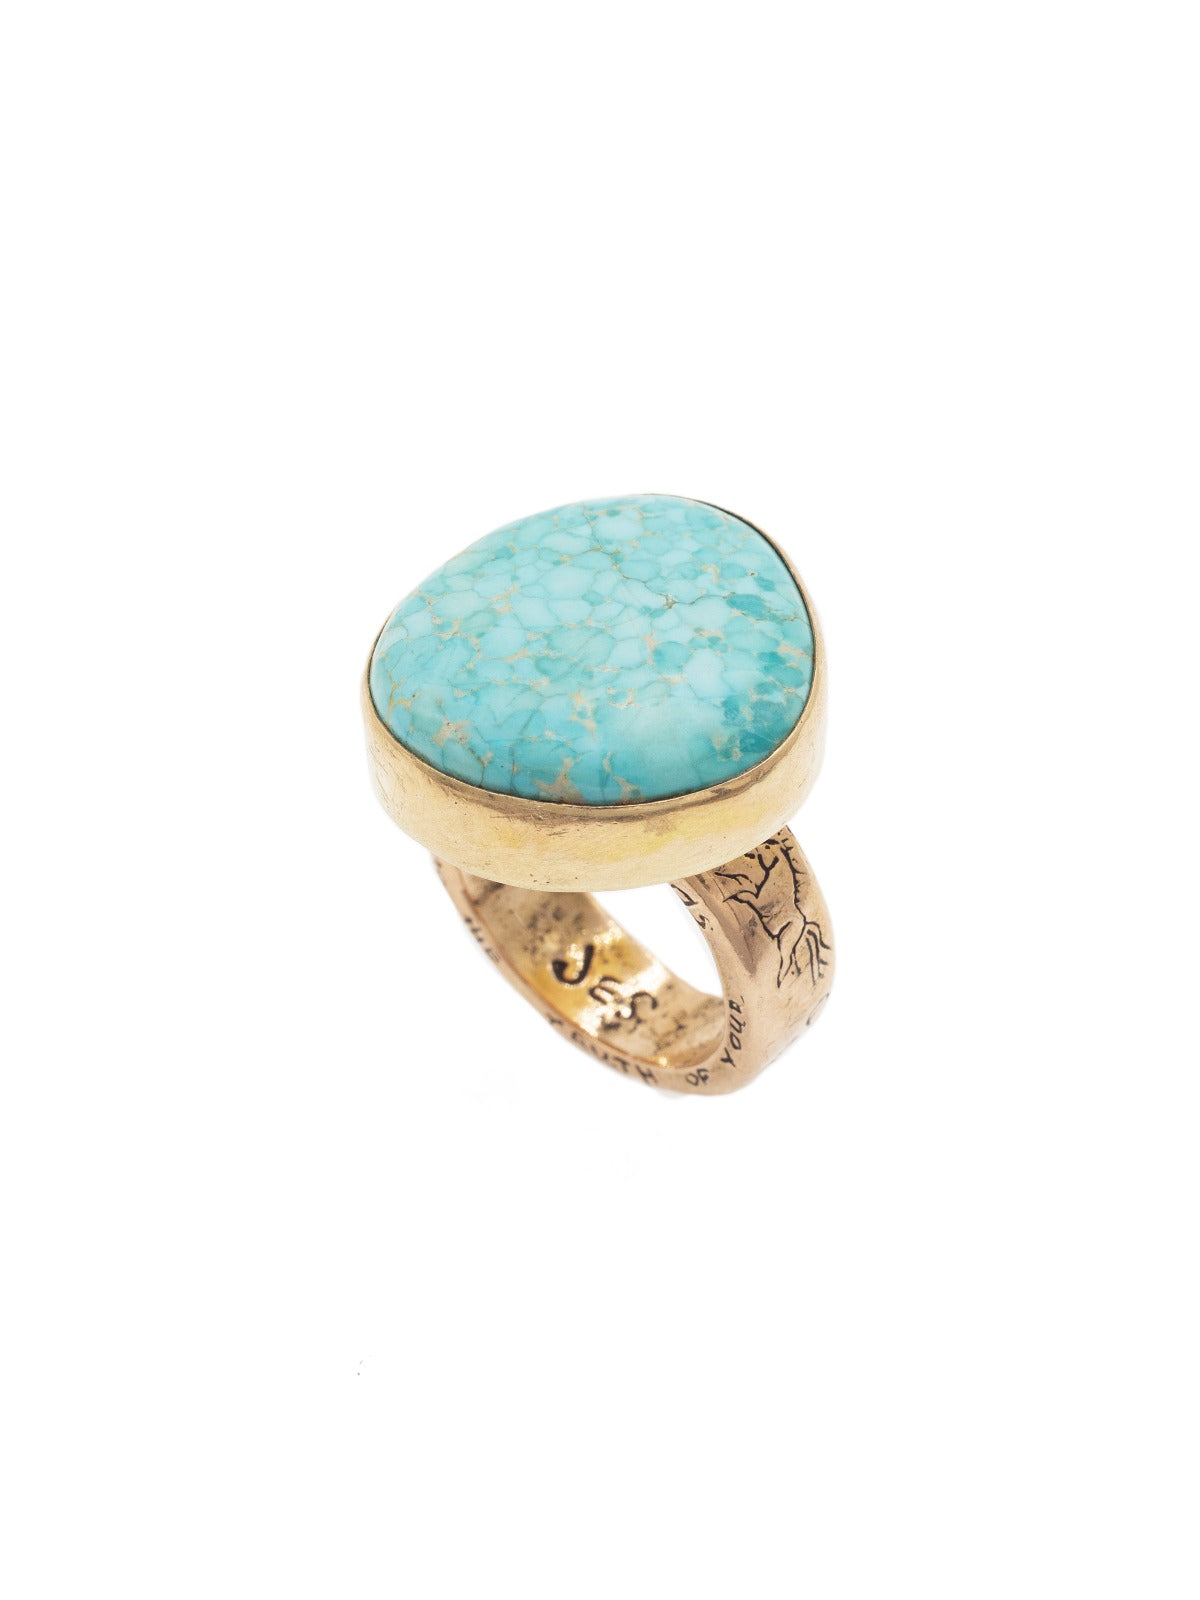 Turquoise Tranquility Ring